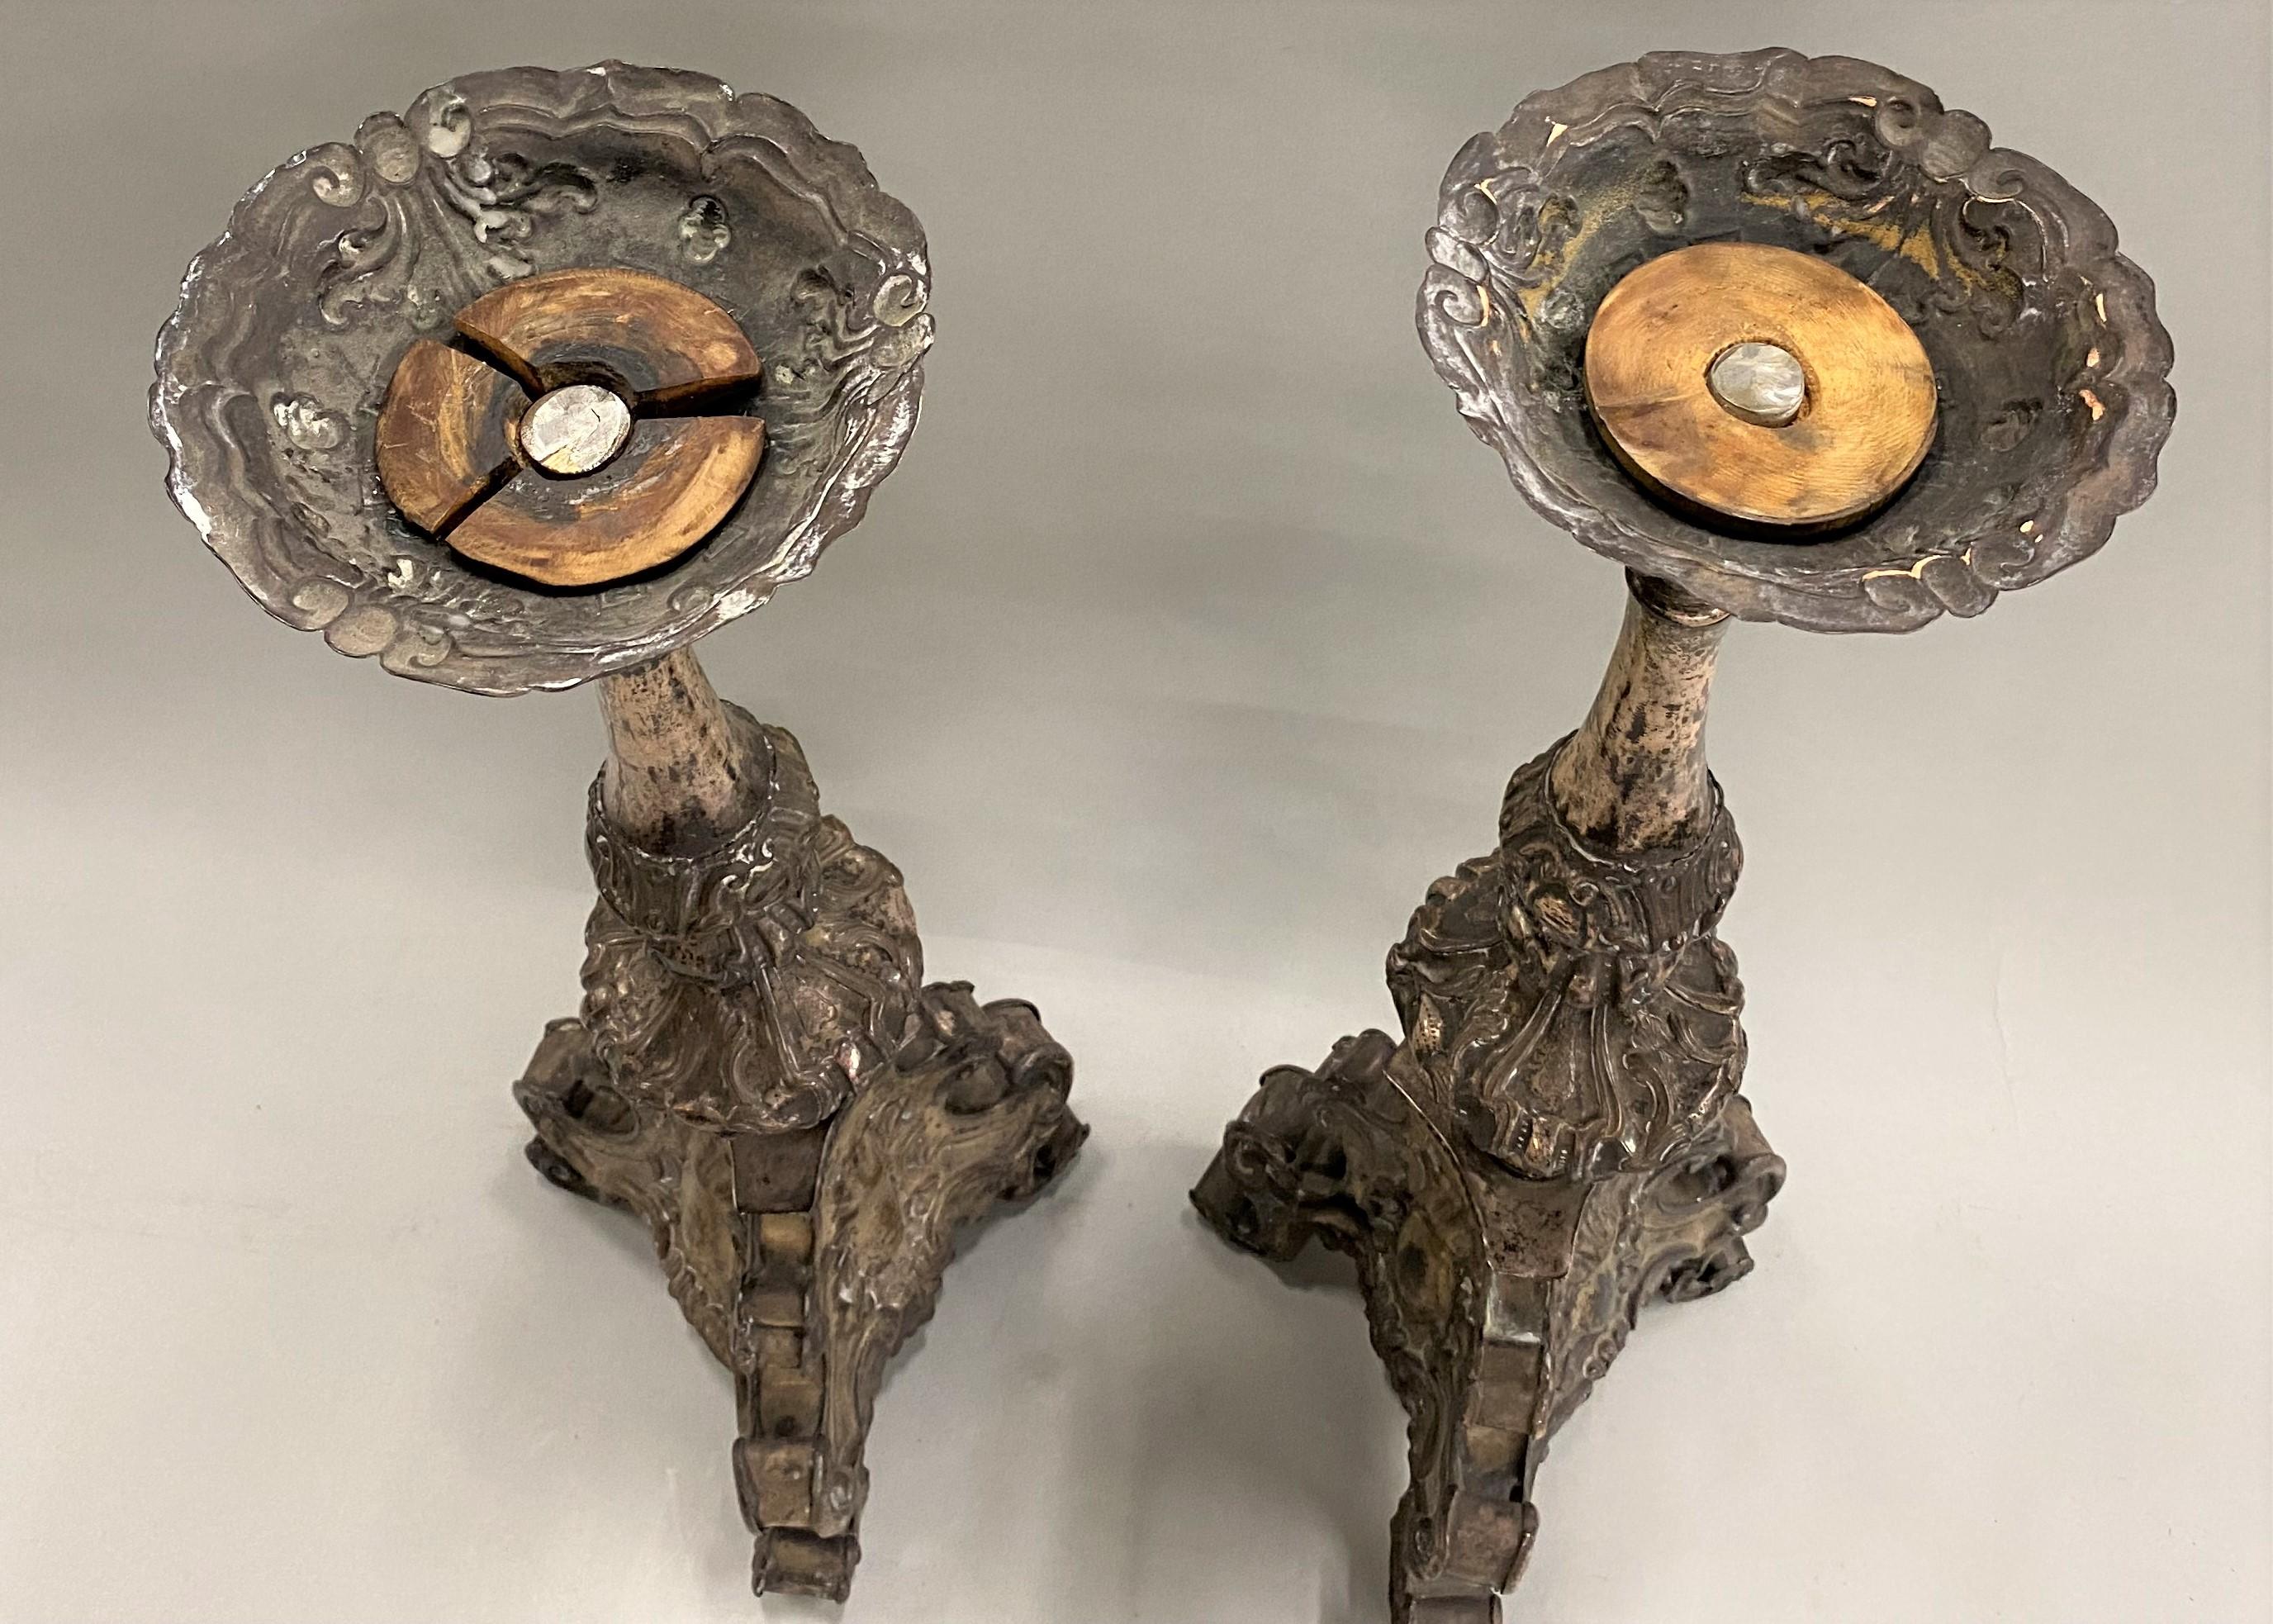 A nice pair of 18th century Italian Baroque style pressed metal candlesticks with metal over wood tripod bases, converted to lamps at some point, but now with wiring and lamp fittings removed (new hardware installed). Good overall condition, with